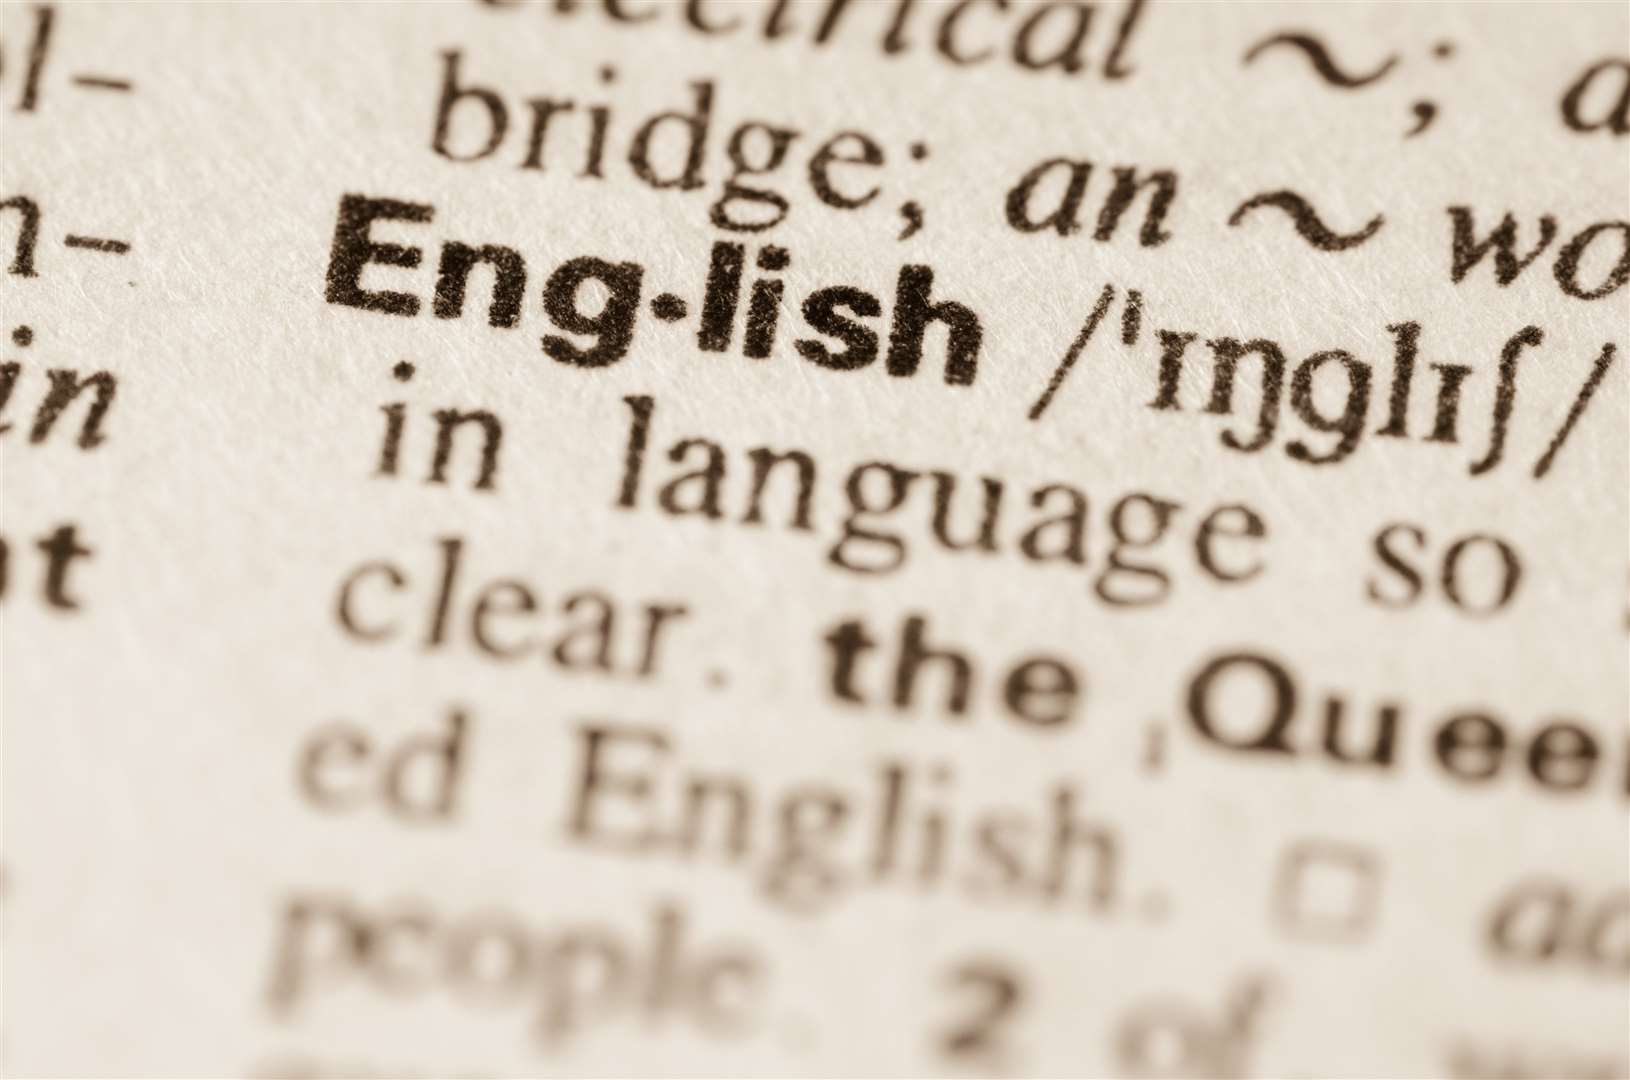 The Oxford English Dictionary is updated a number of times each year